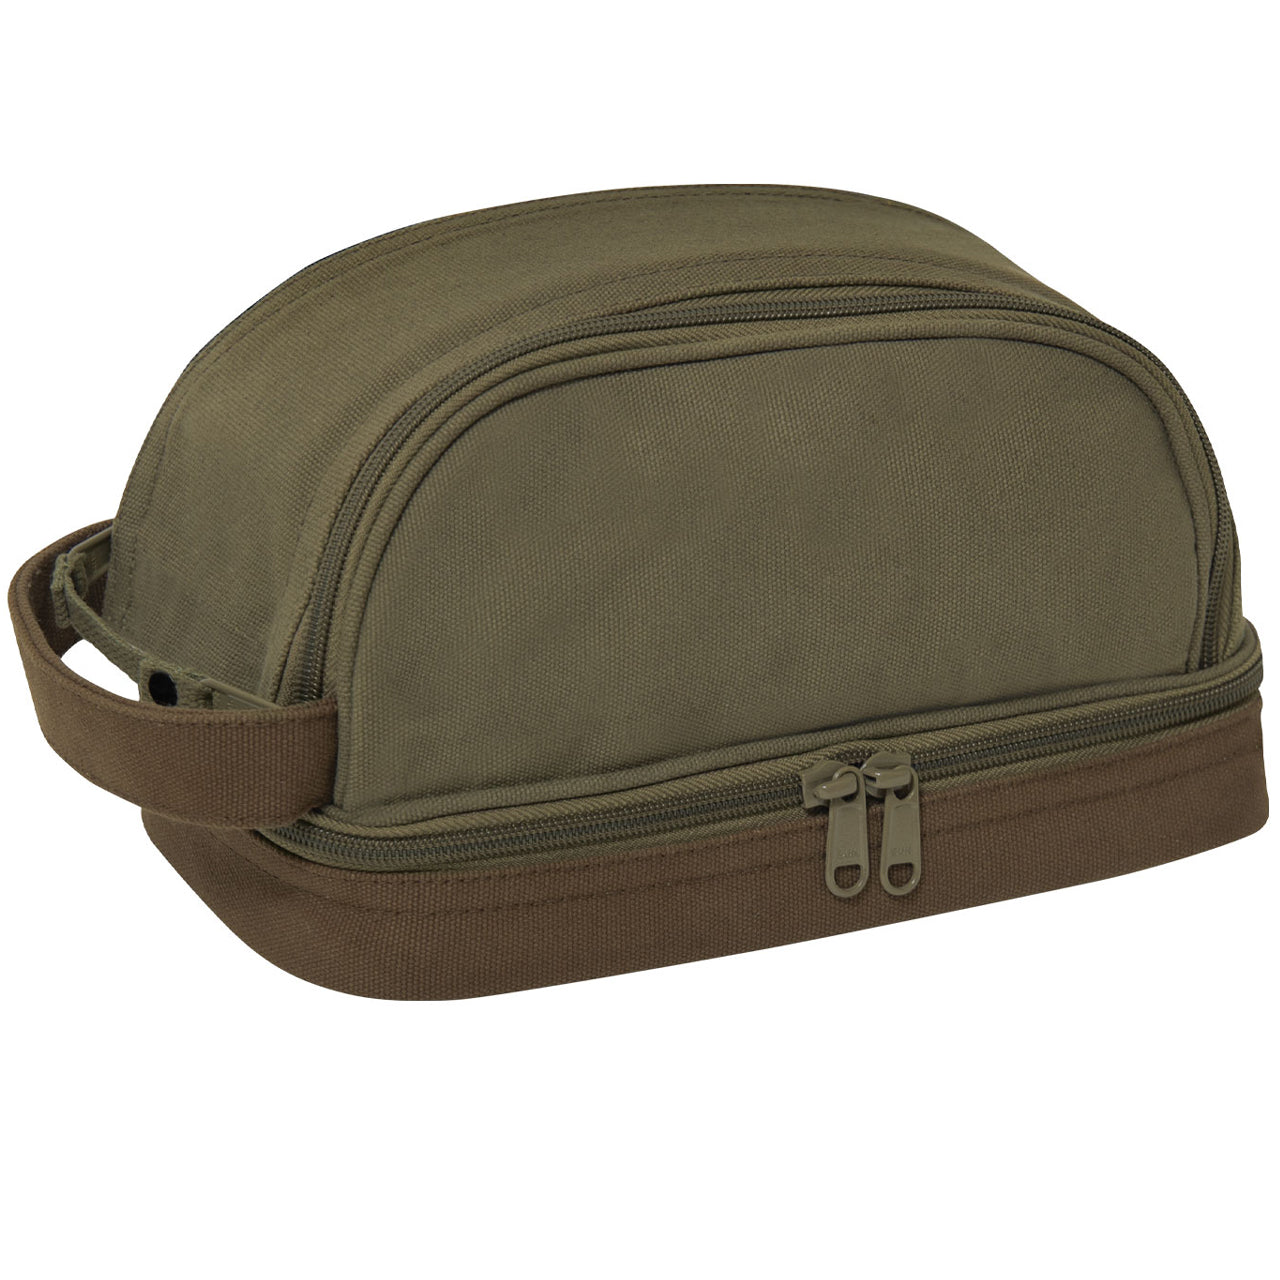 Rothco’s Deluxe Canvas Toiletry Kit Is Equipped With A Carry Handle, Multiple Compartments, And Mesh Pockets To Keep Your Travel Essentials Organized For Easy Access While On The Go. www.defenceqstore.com.au